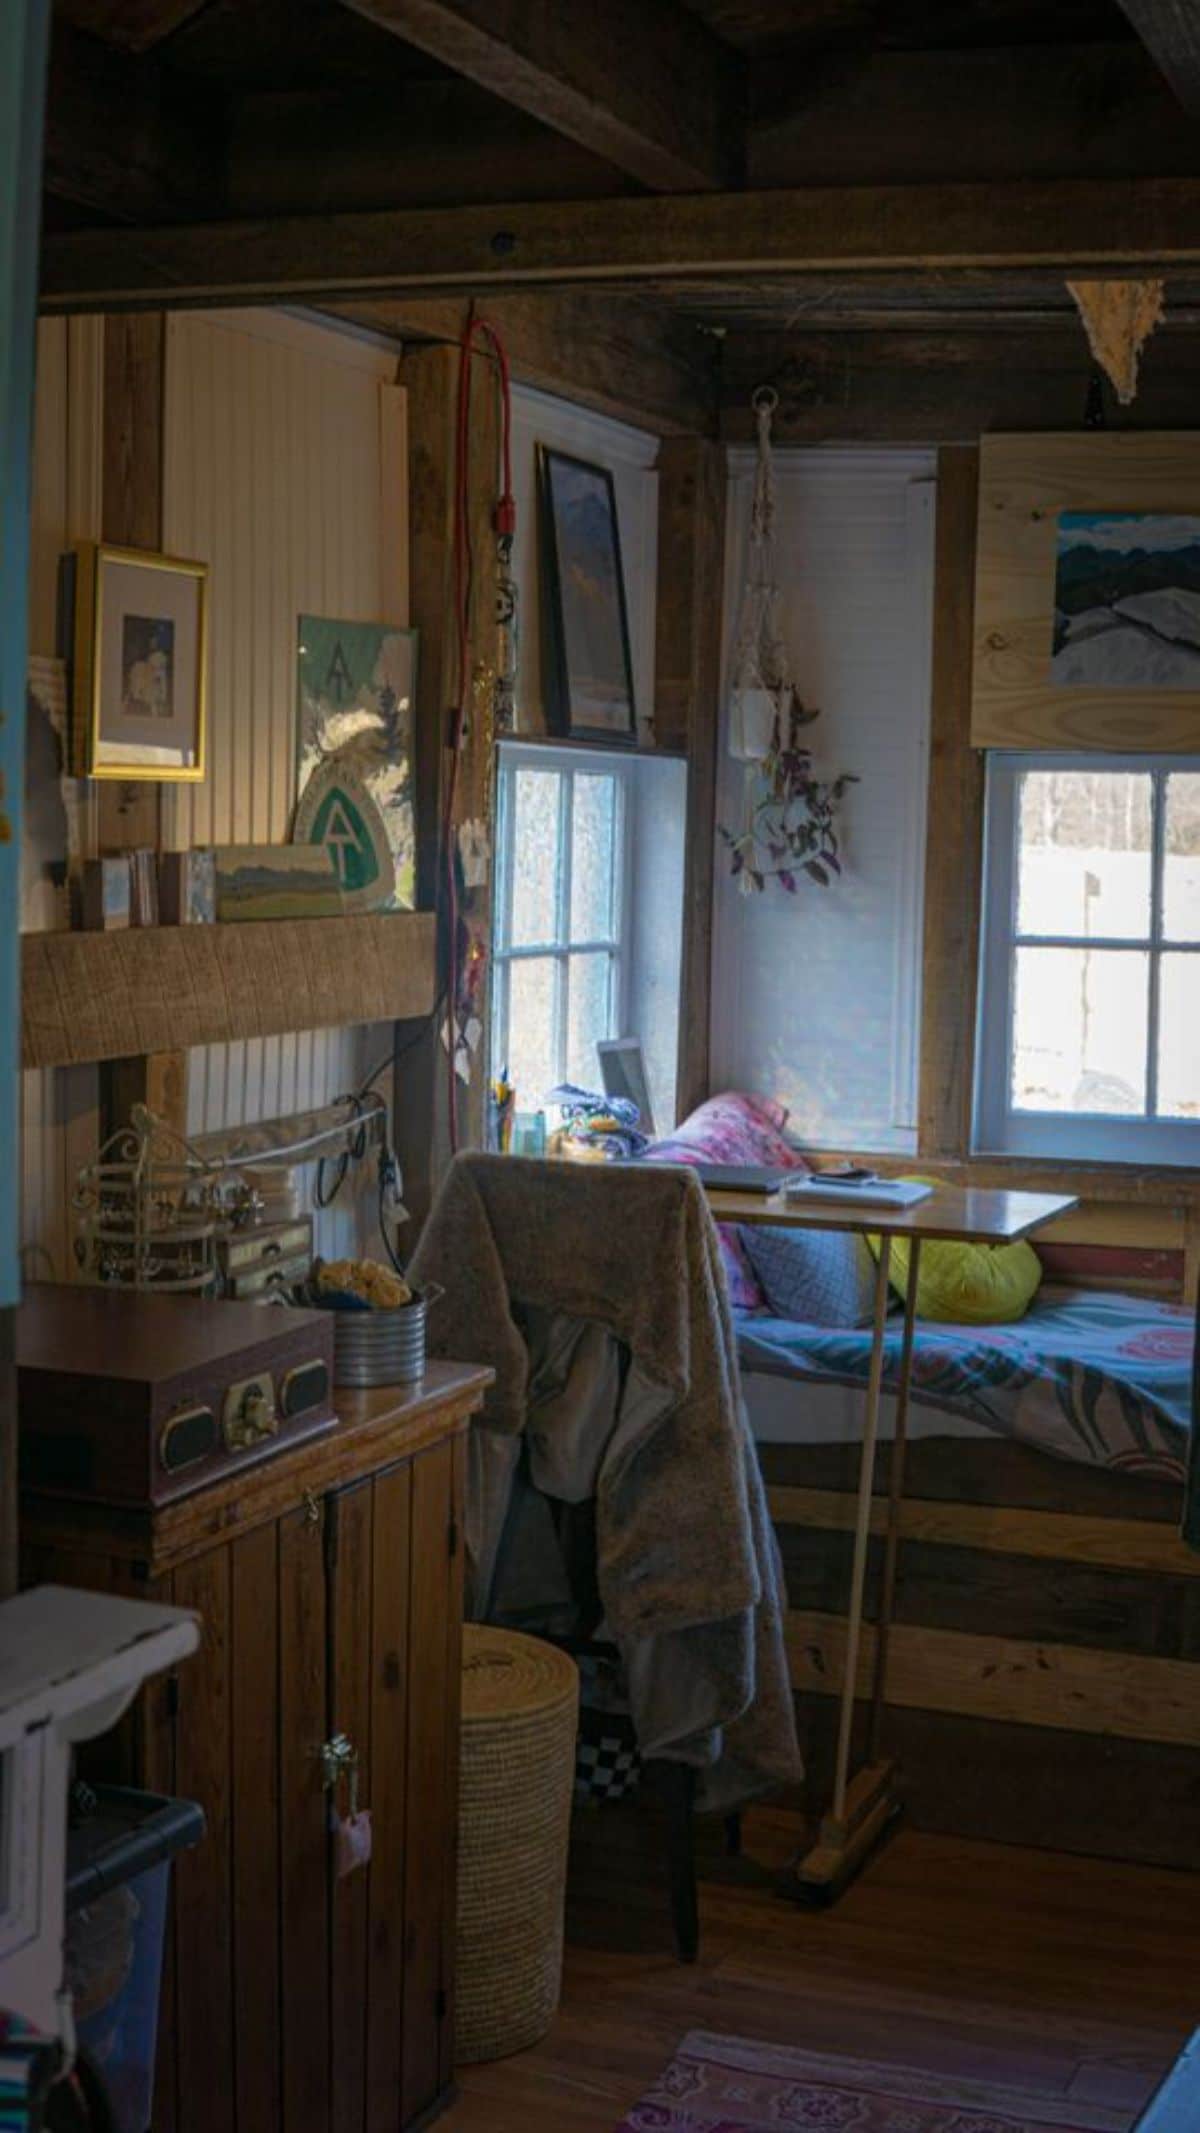 Living area and interiors of the tiny house